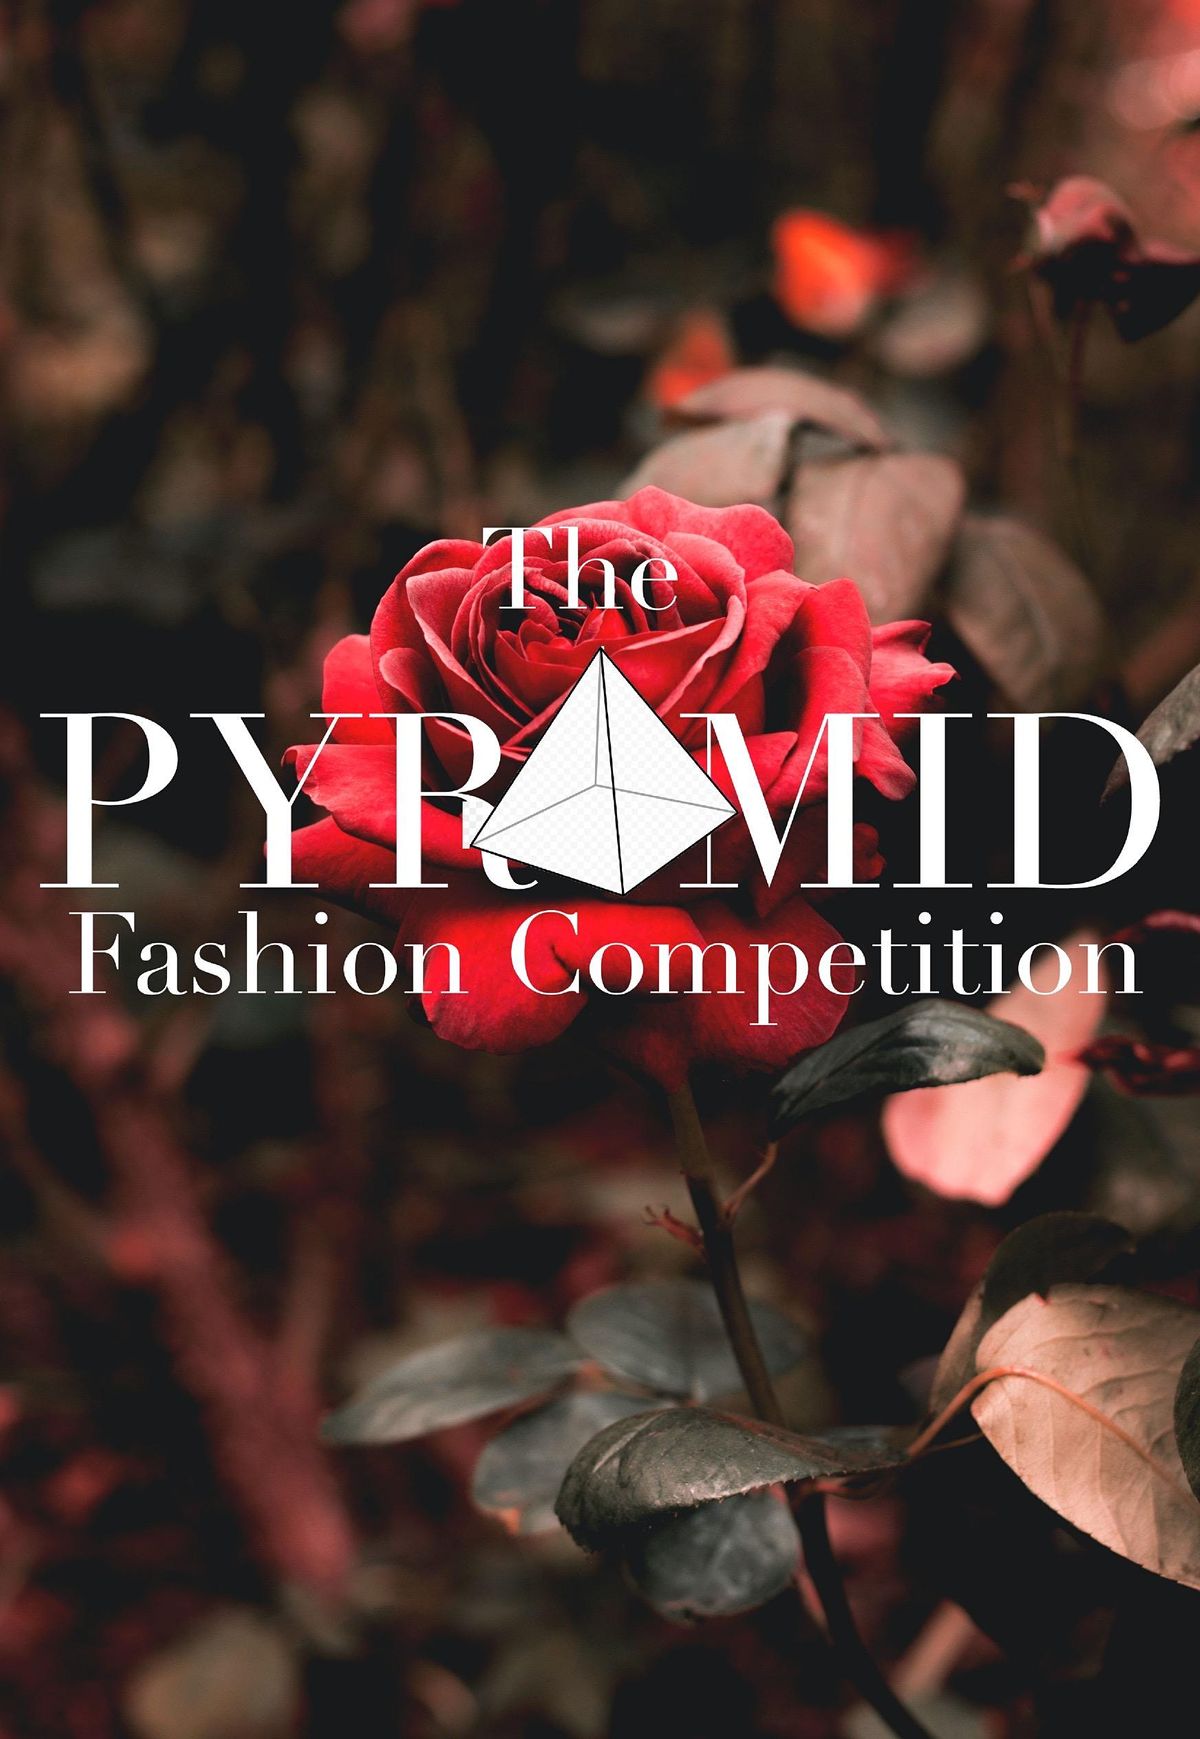 The Pyramid Fashion Competition